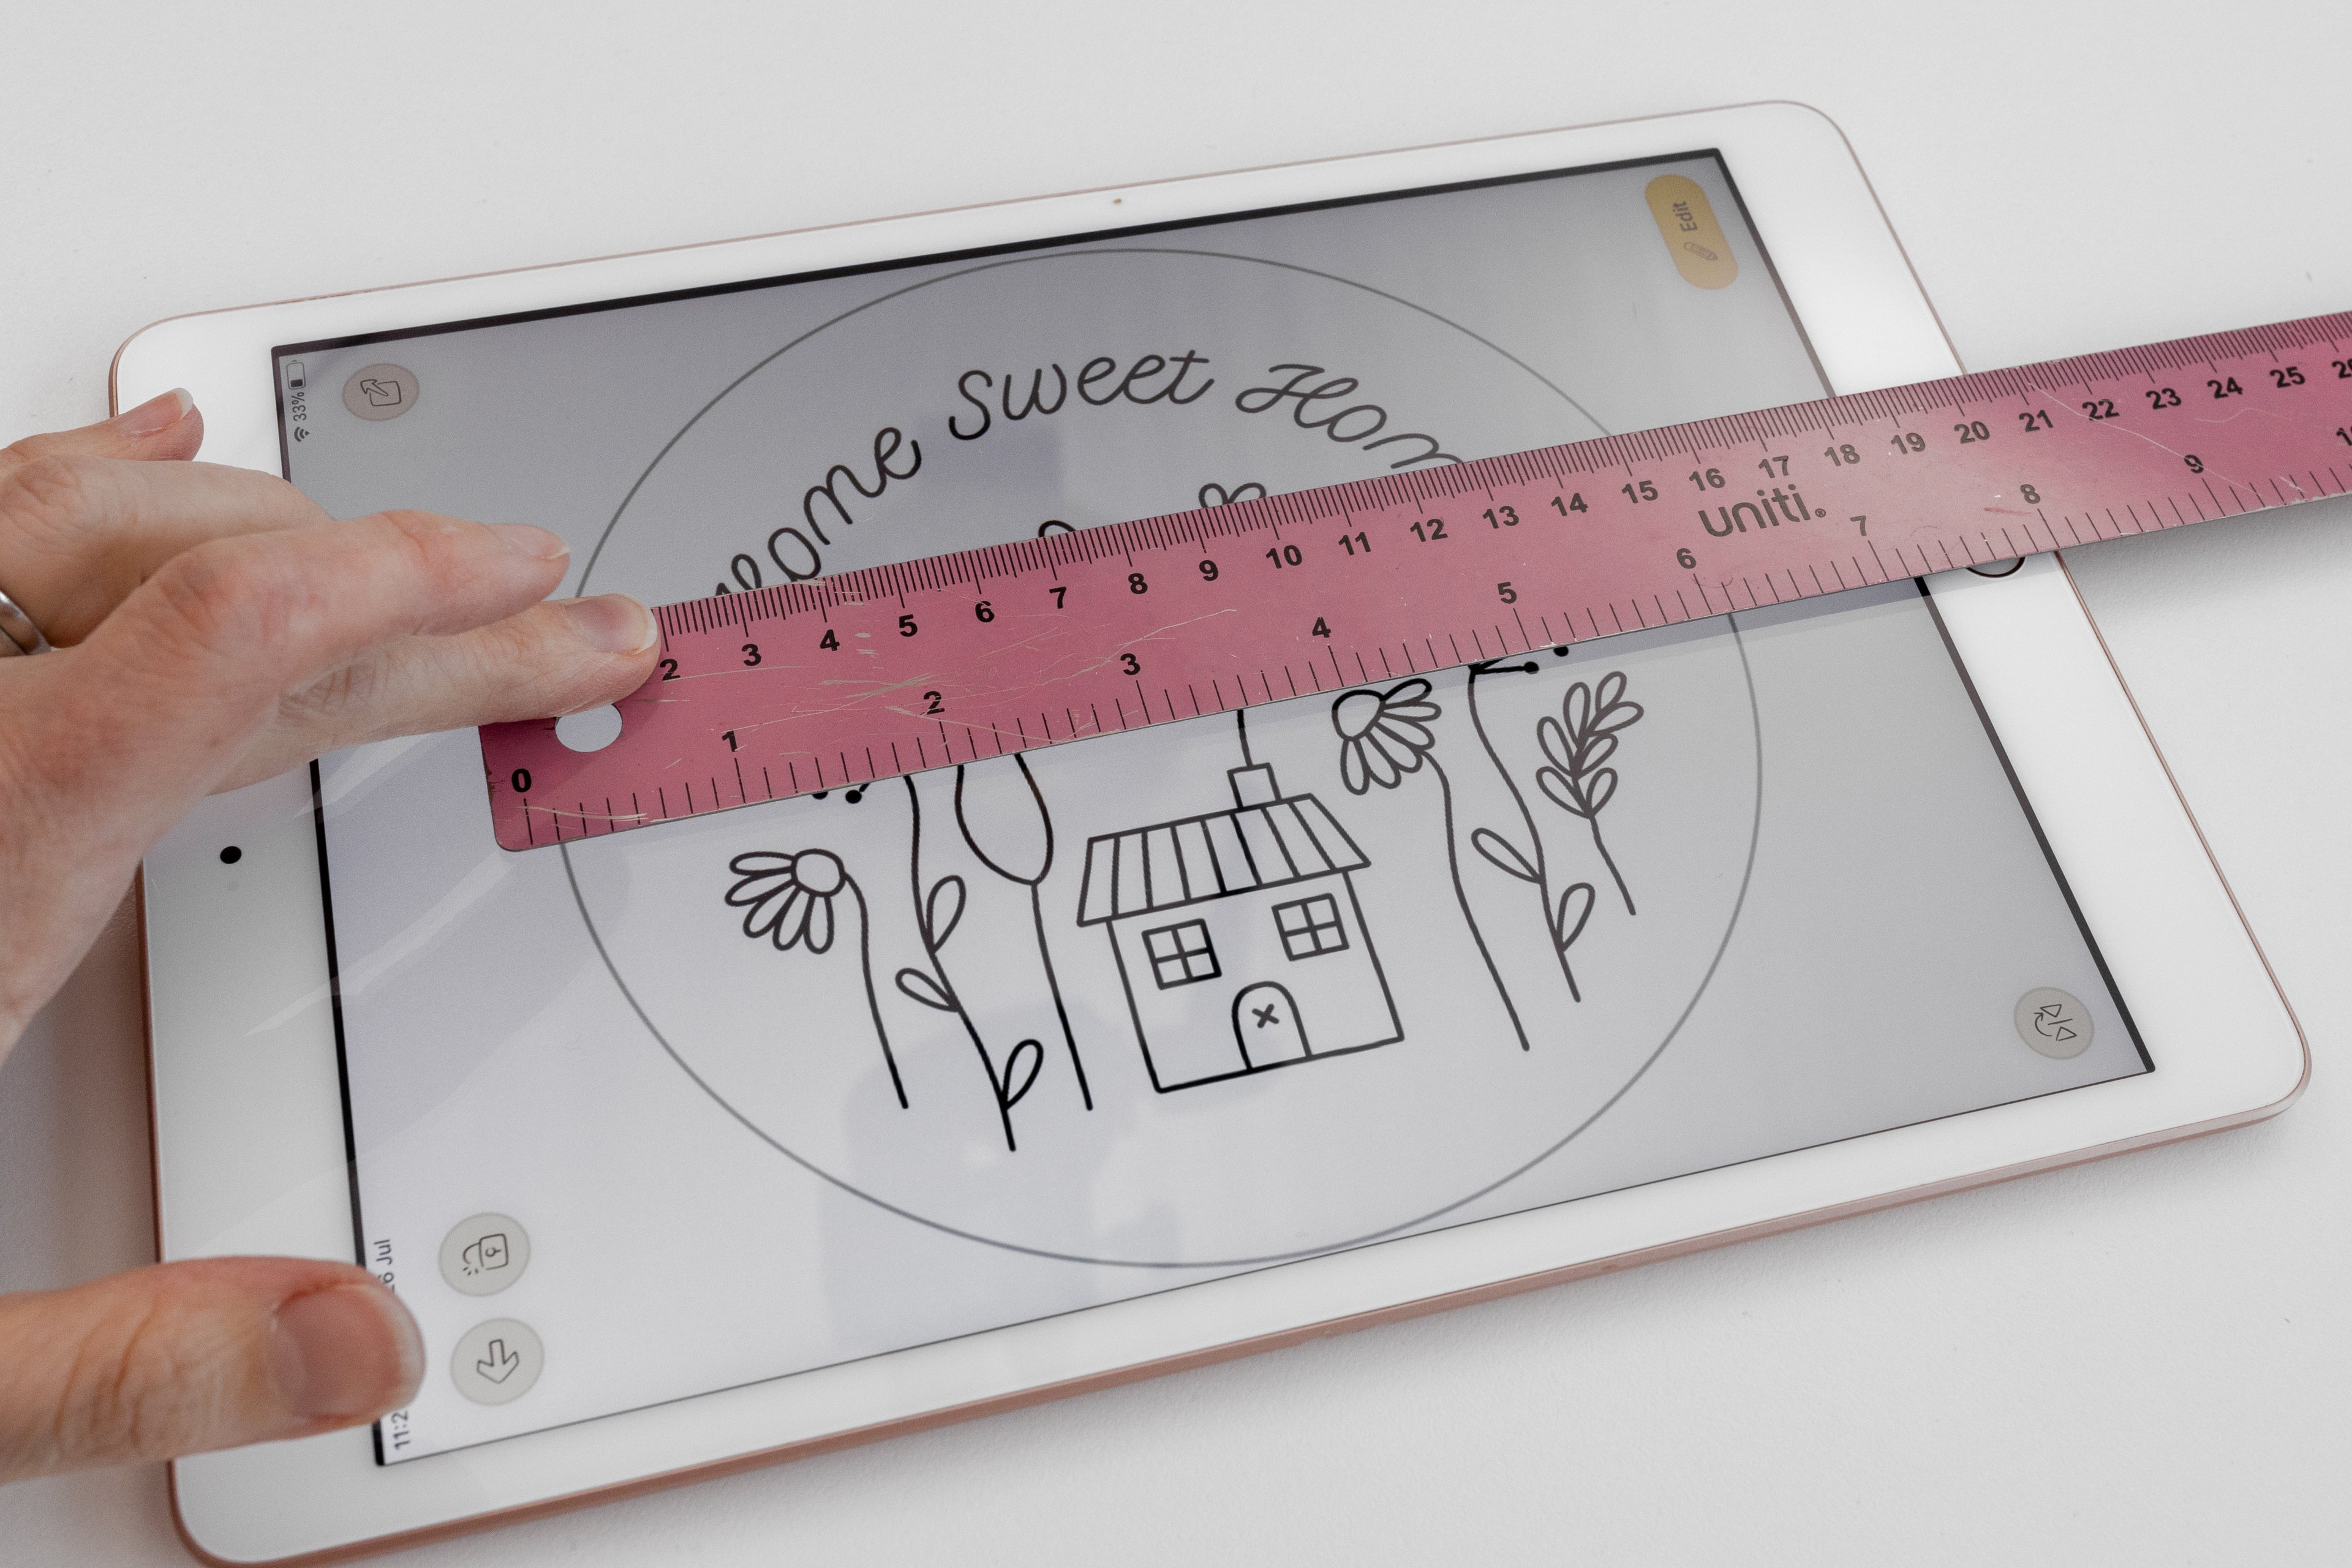 A hand holds a ruler over an ipad with a pattern on it.